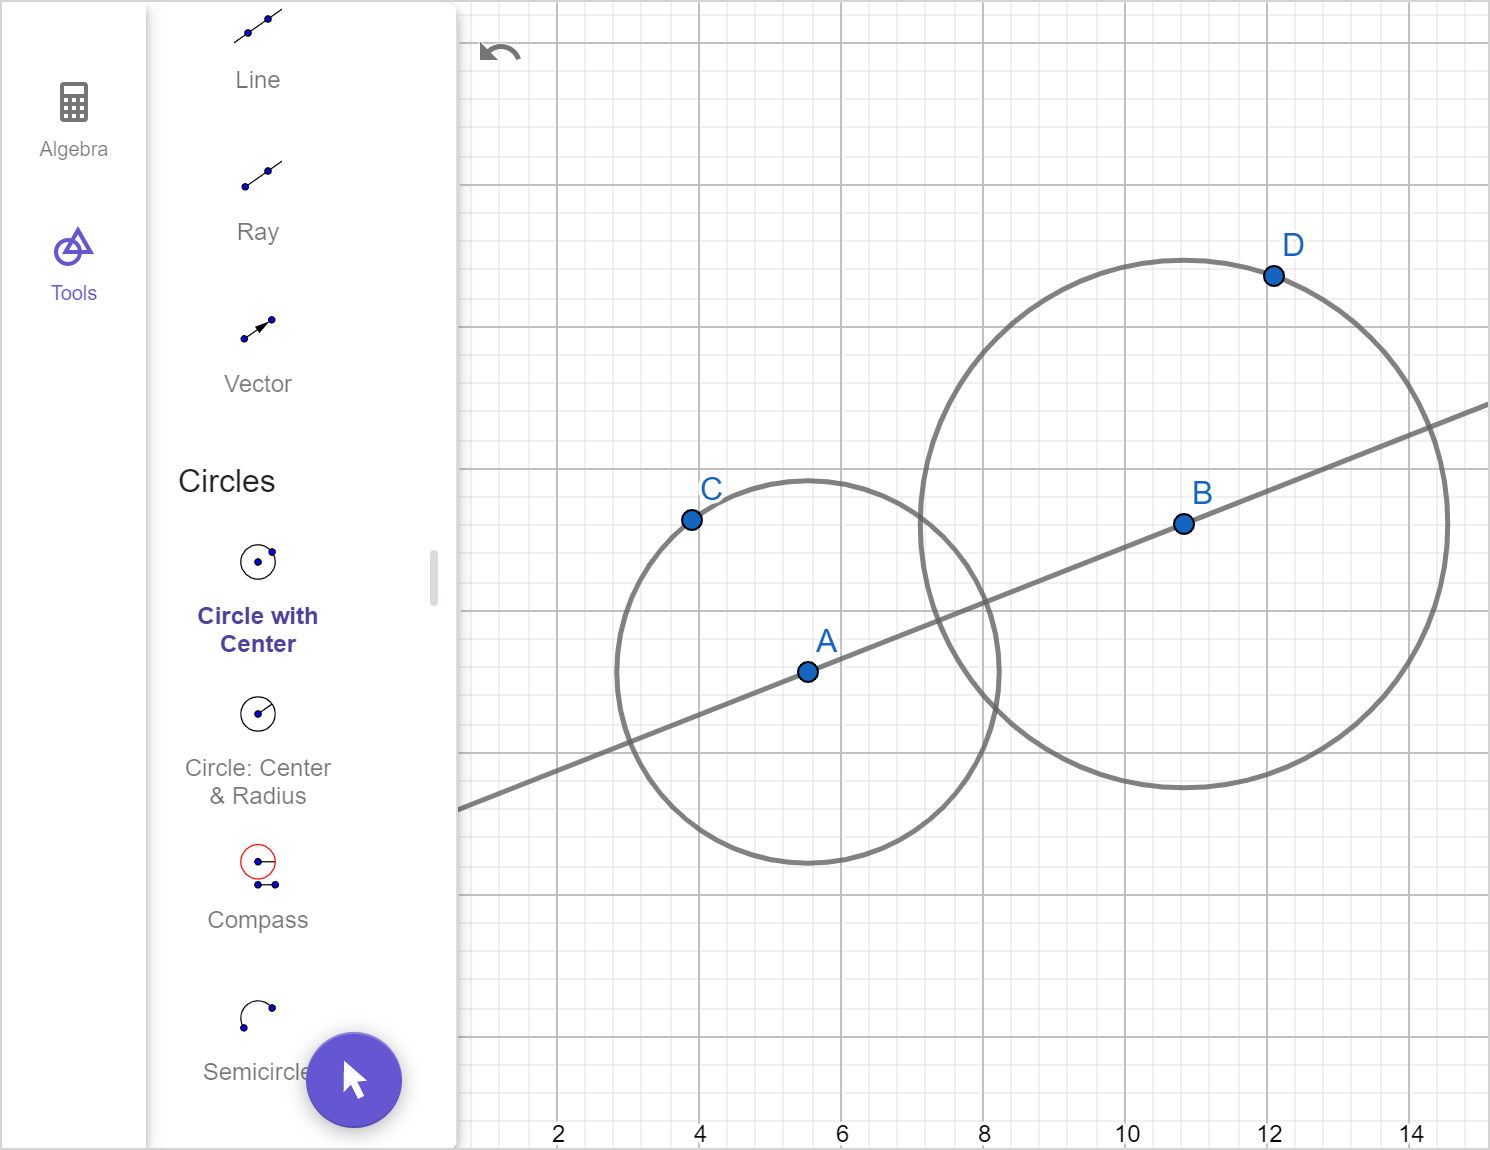 A screenshot of the GeoGebra geometry tool showing the constructions described in step 2. Speak to your teacher for more details.